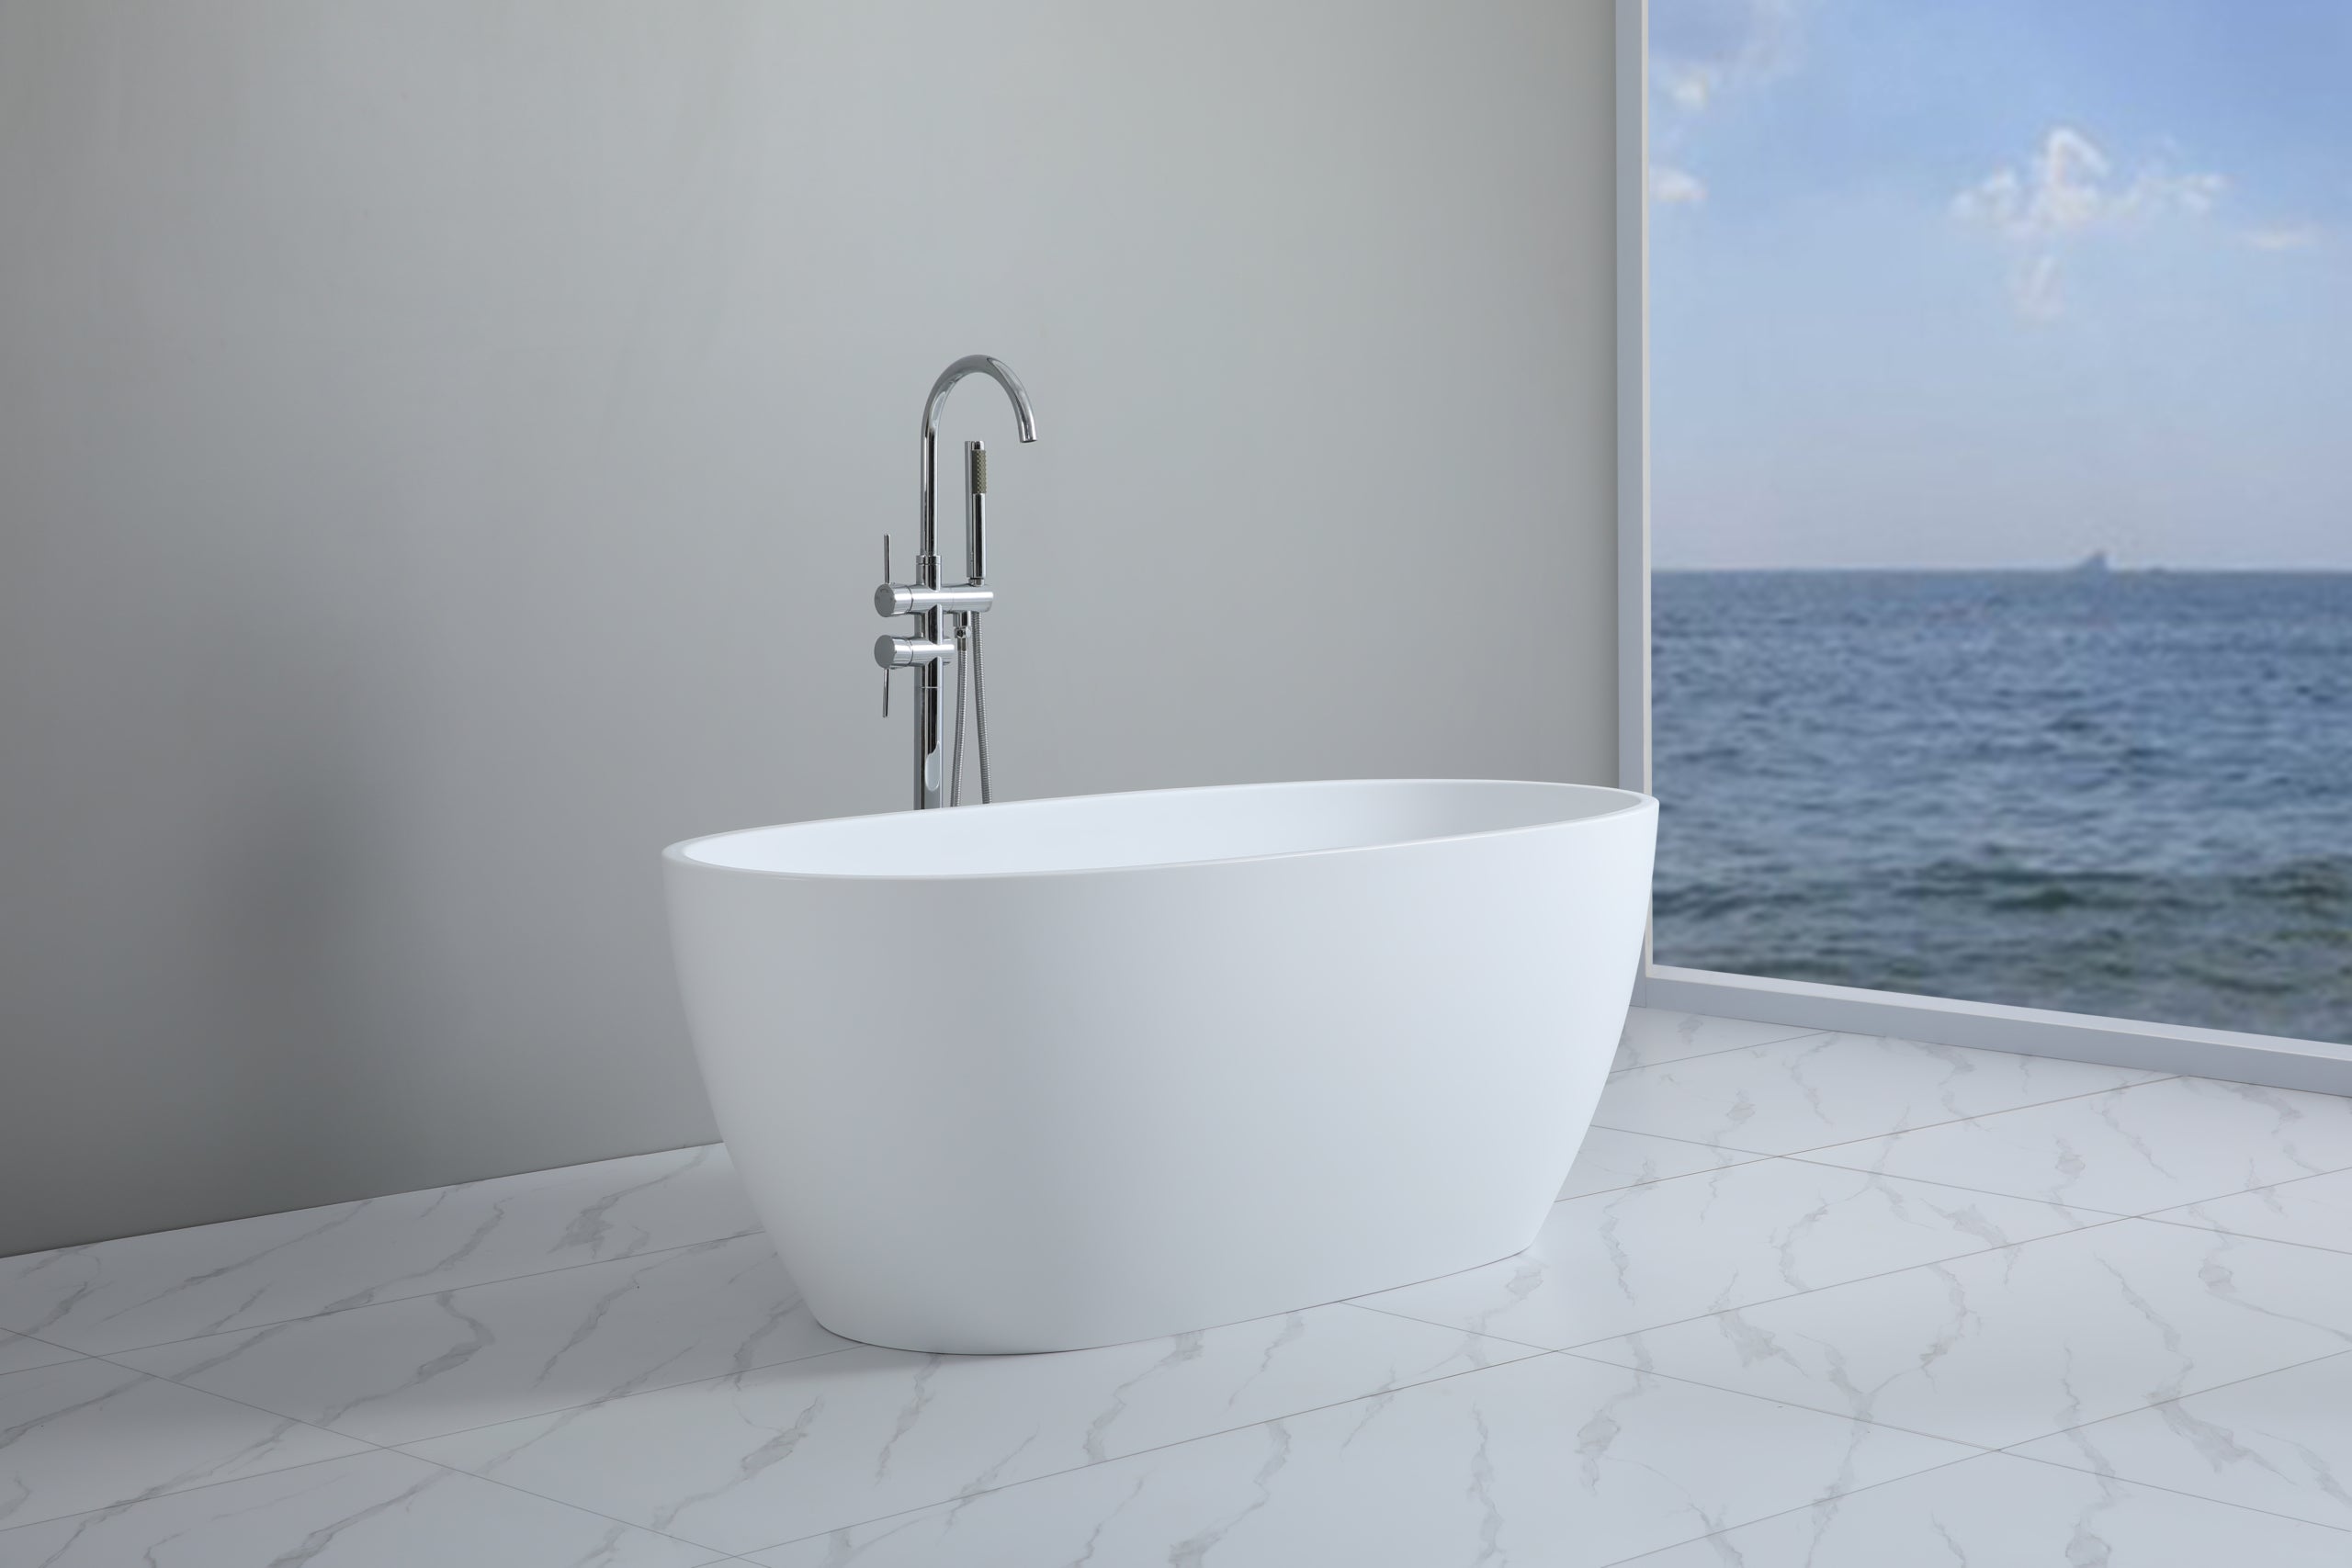 POSEIDON STELLA FREE STANDING BATH MATTE WHITE FINISH (AVAILABLE IN 1500MM AND 1700MM)